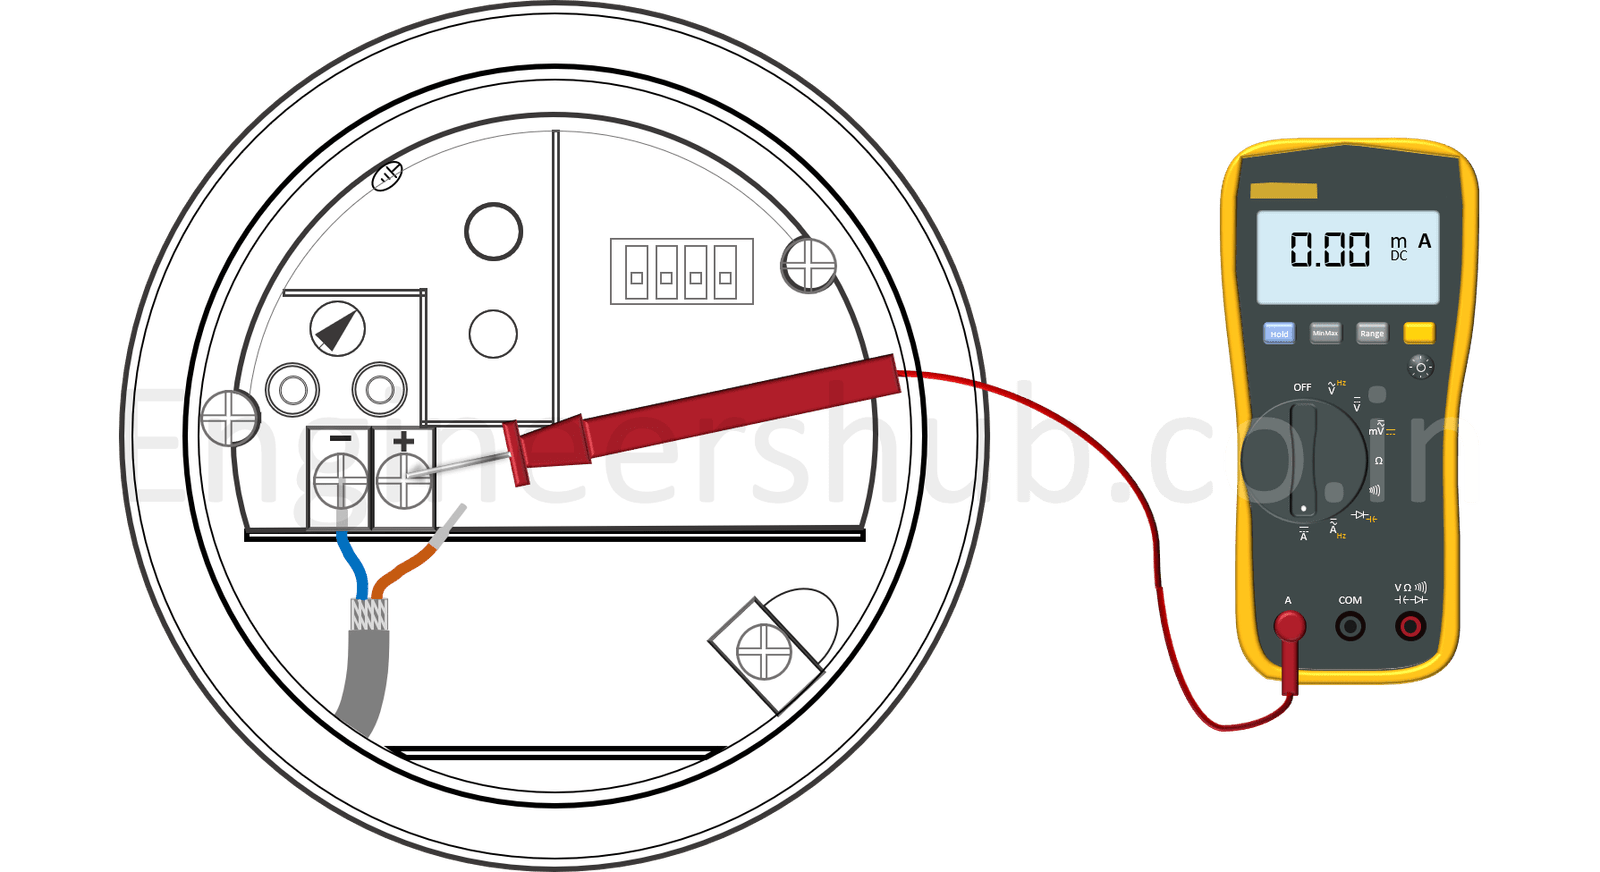 Red lead connection to transmitter to measure mA